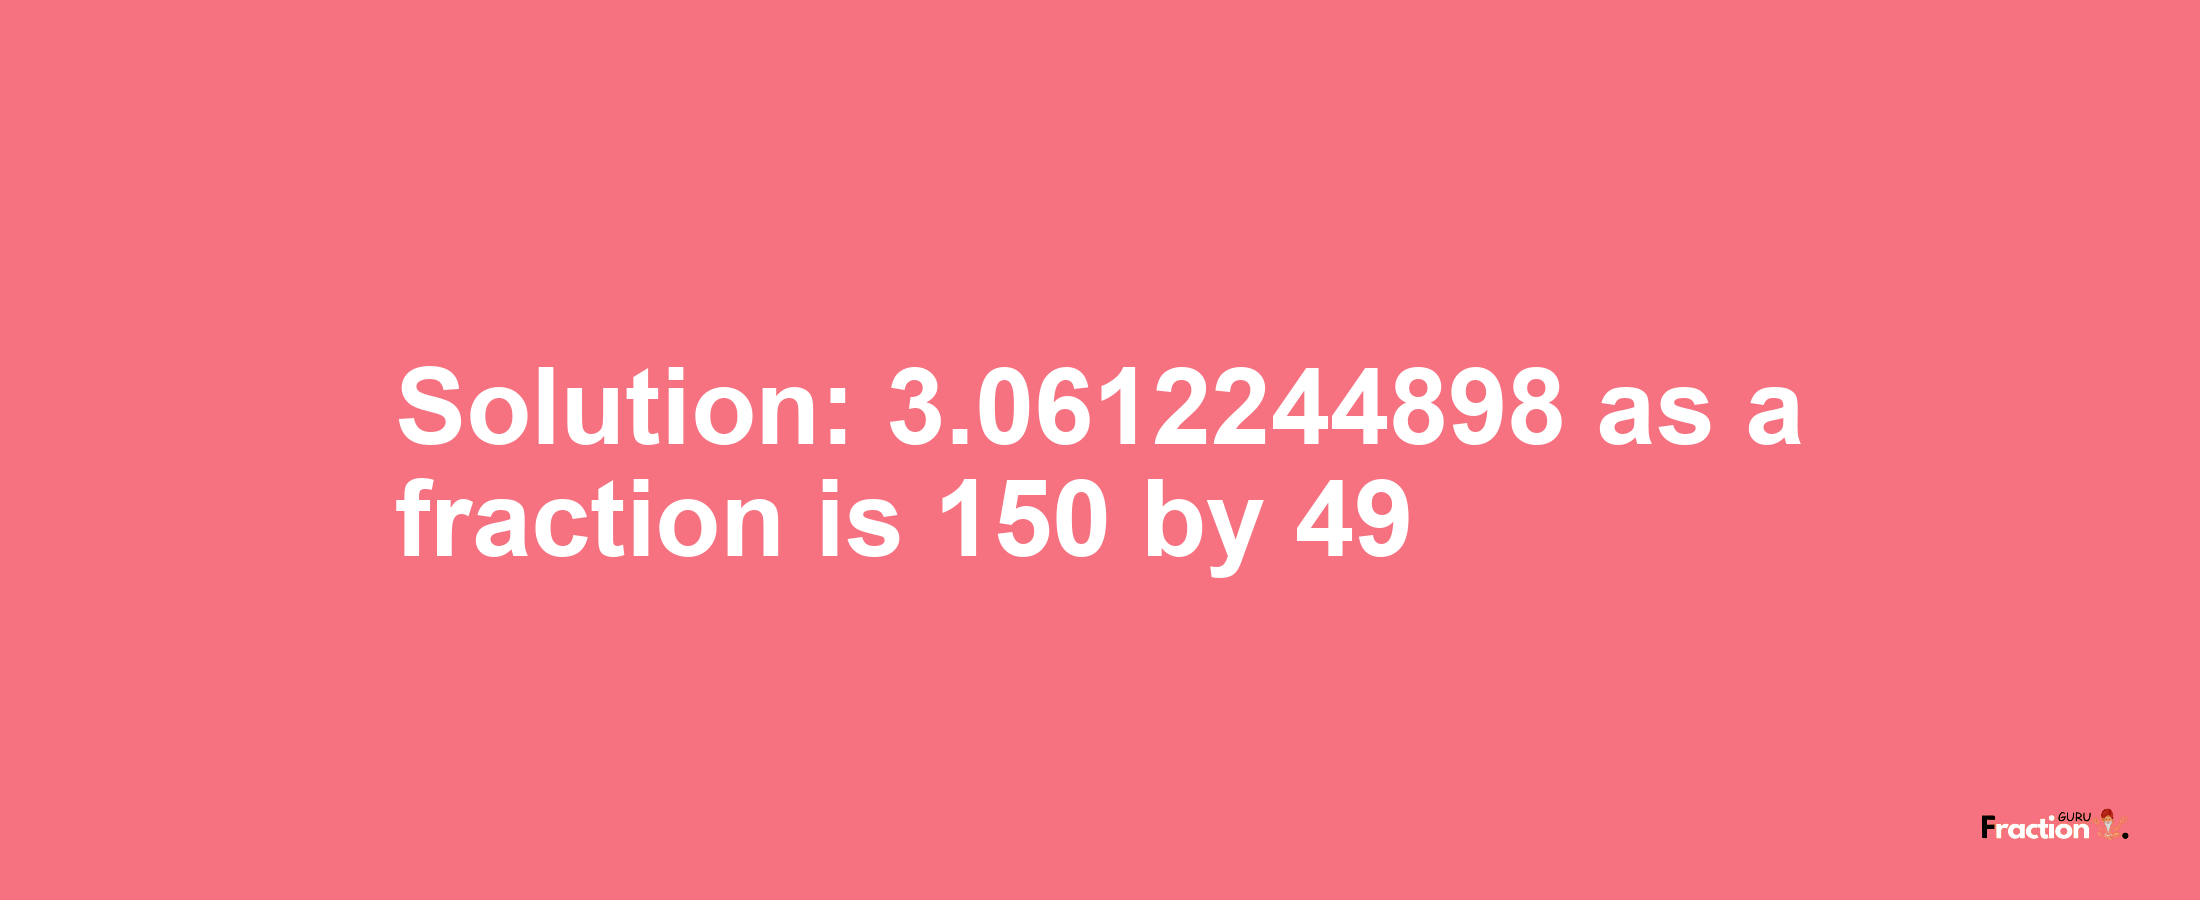 Solution:3.0612244898 as a fraction is 150/49